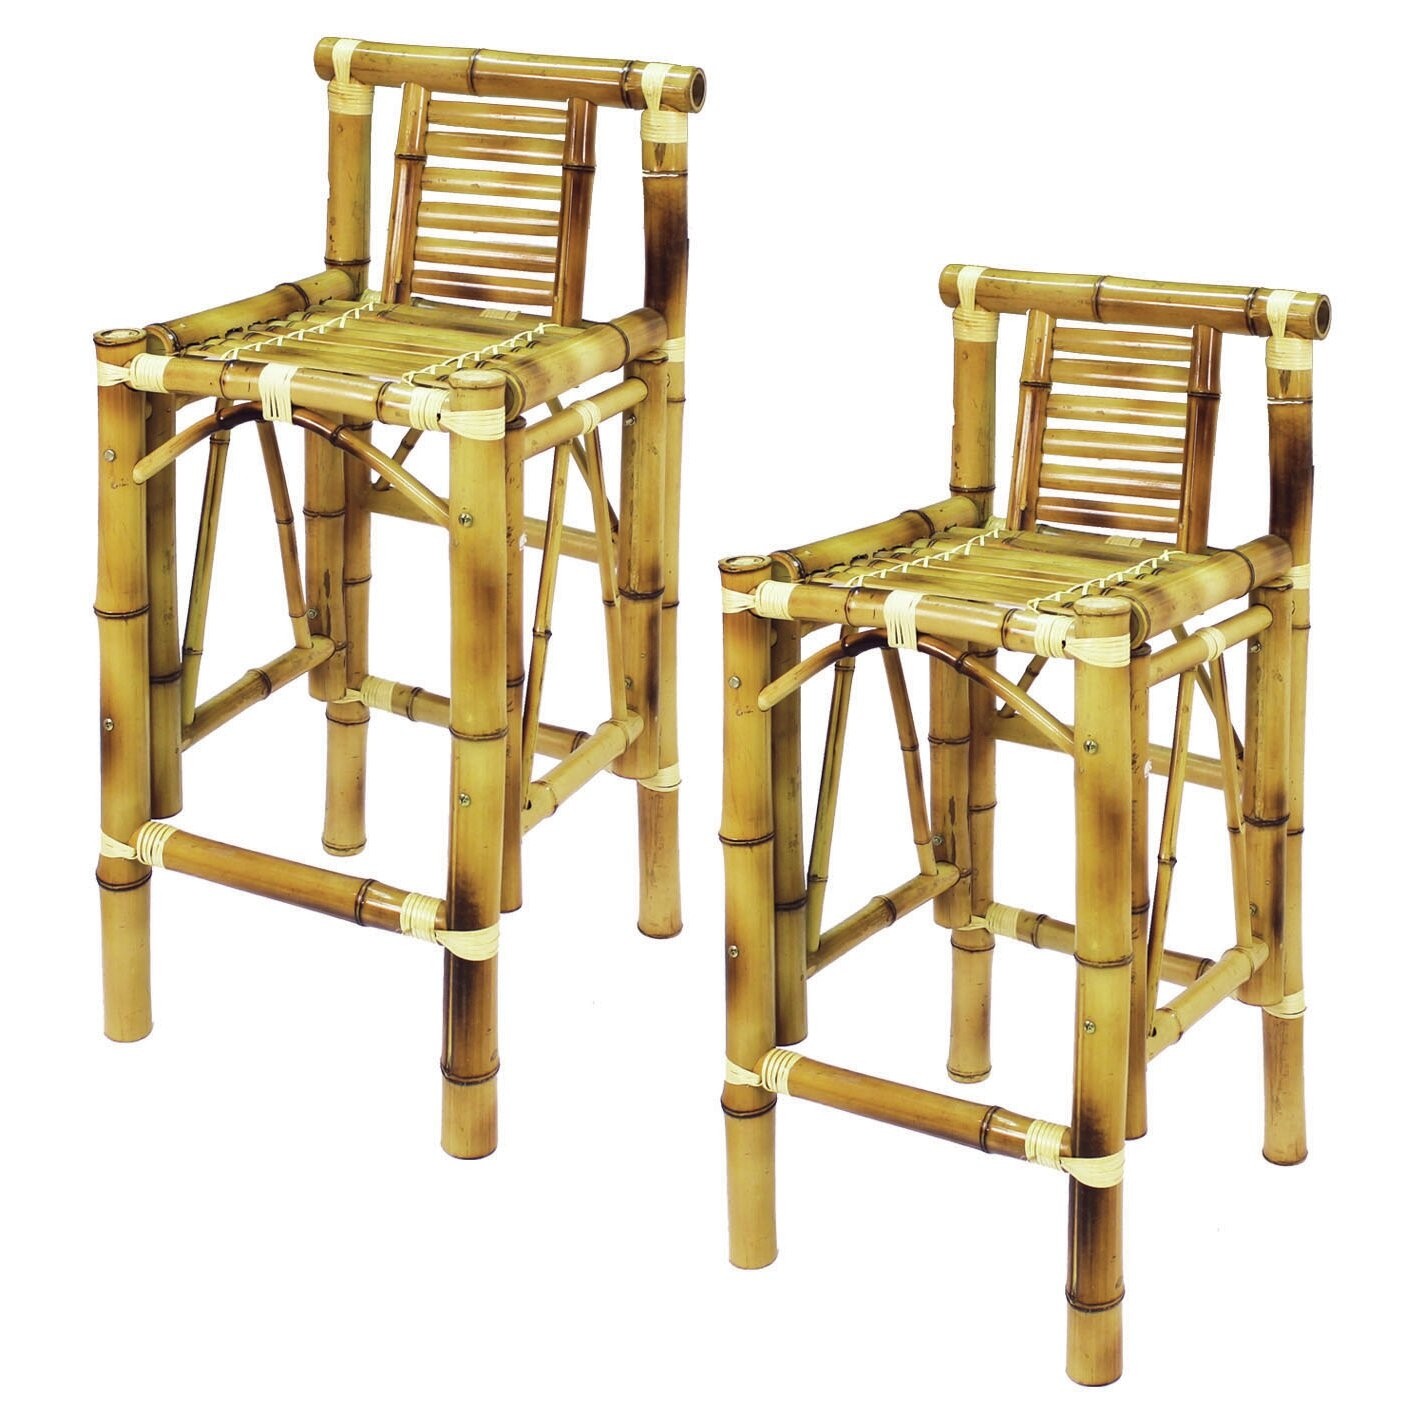 RAM Gameroom Products TBSTL 28 in. Seat Height Bamboo Tiki Barstools - Set of 2